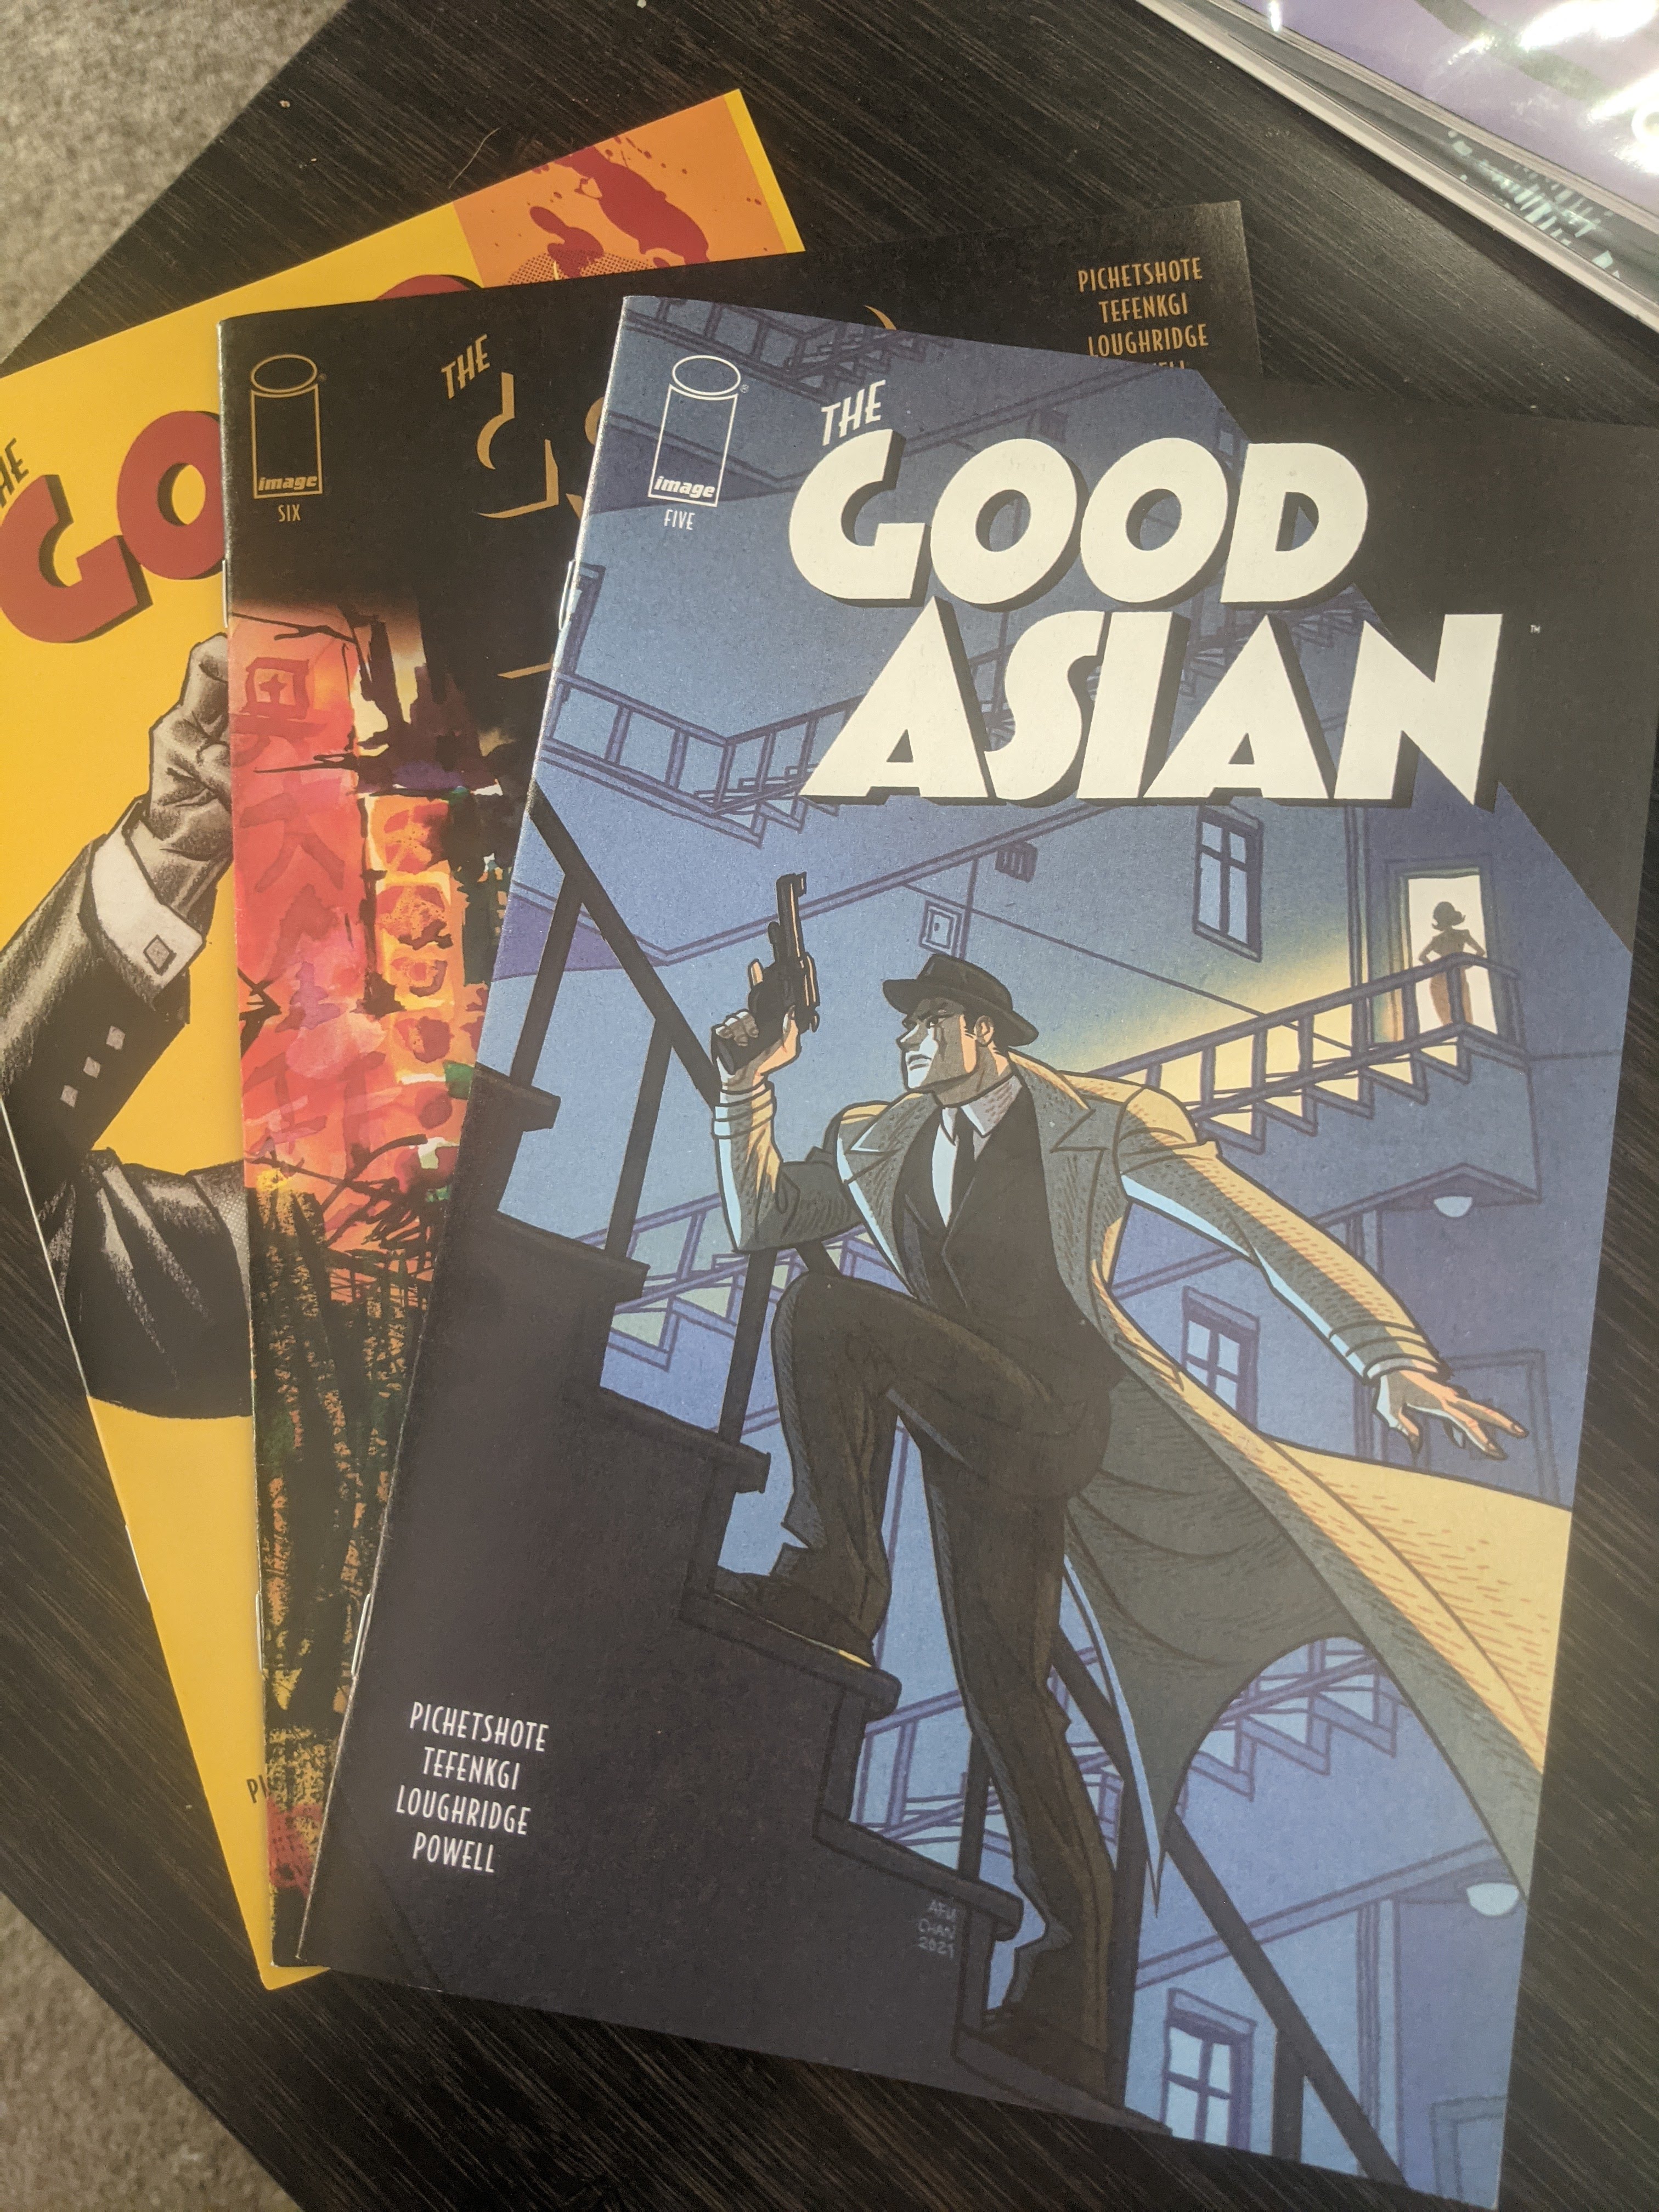 Image of The Good Asian comic book.